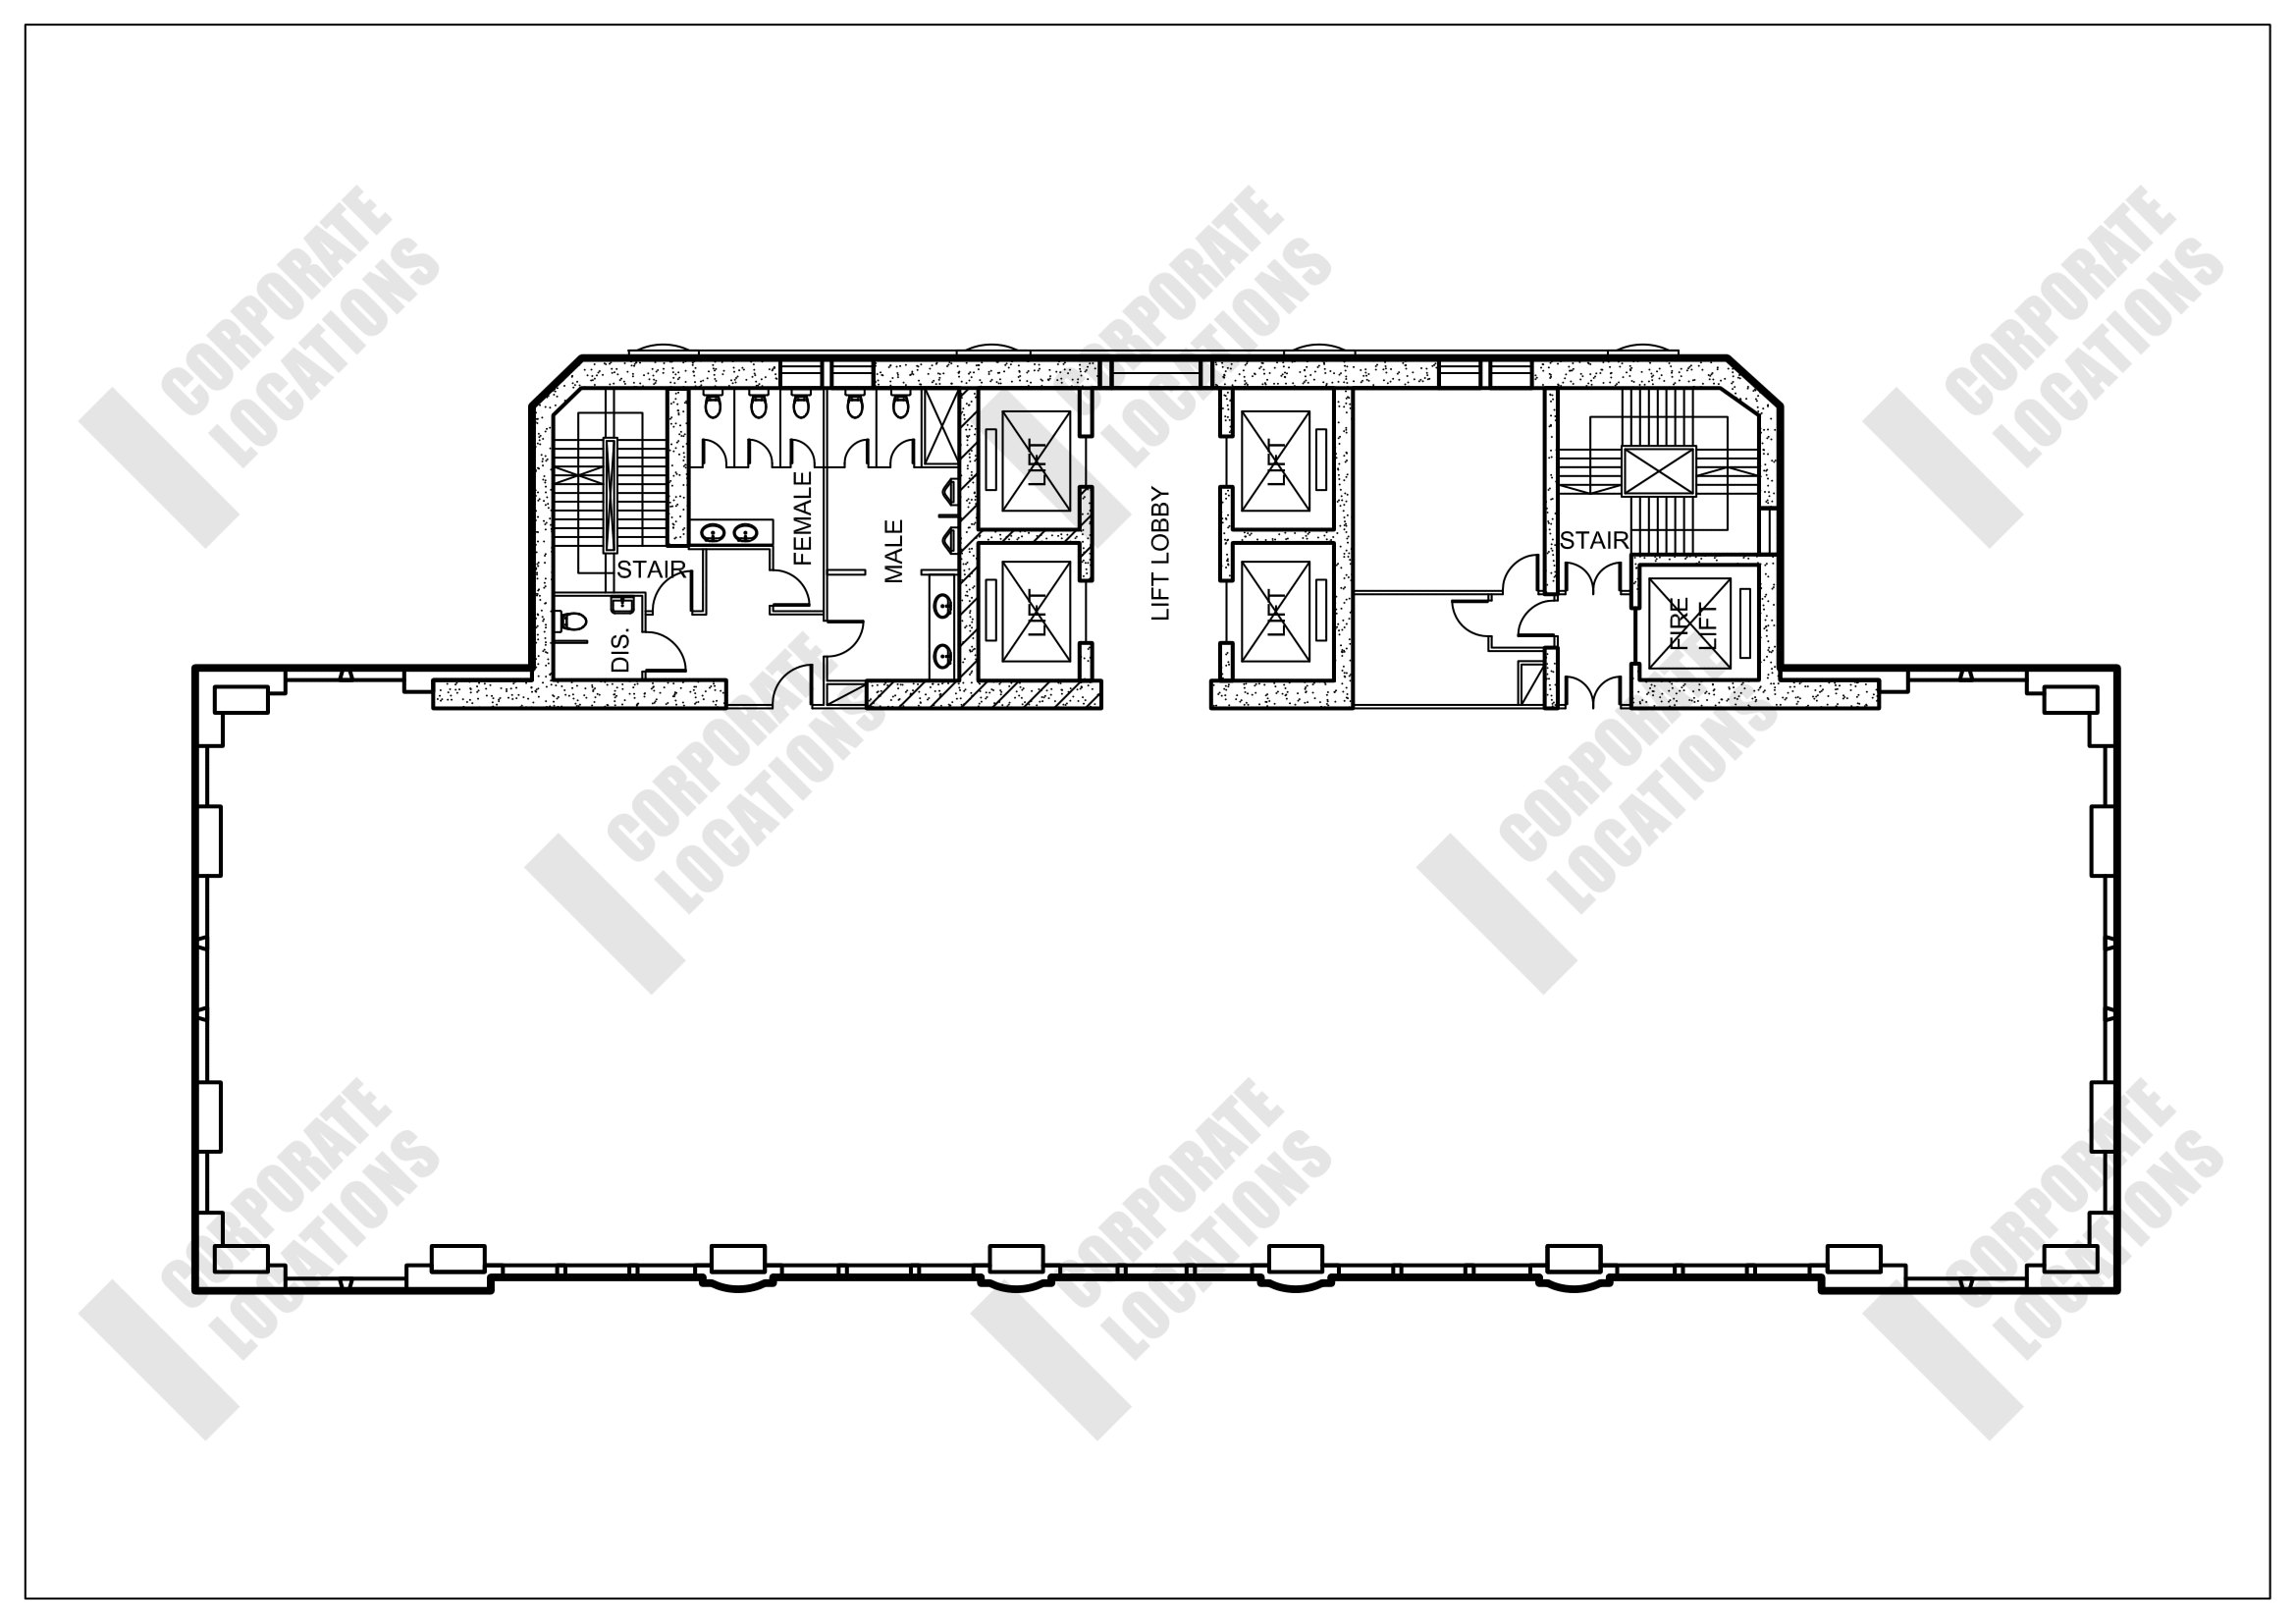 Floorplan Agricultural Bank of China Tower